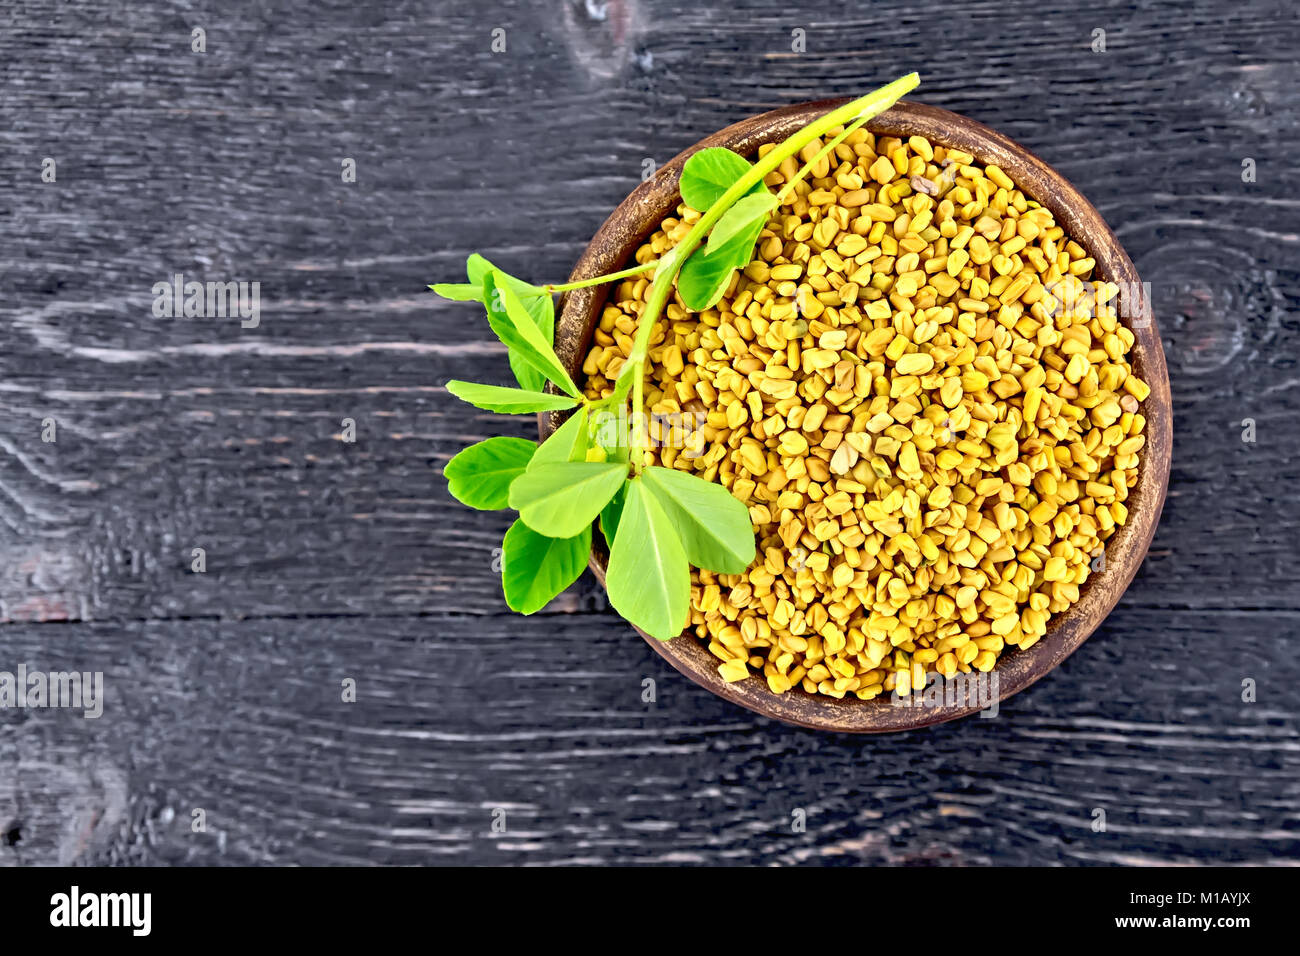 Fenugreek seeds in a clay bowl with green leaves on a wooden plank background Stock Photo